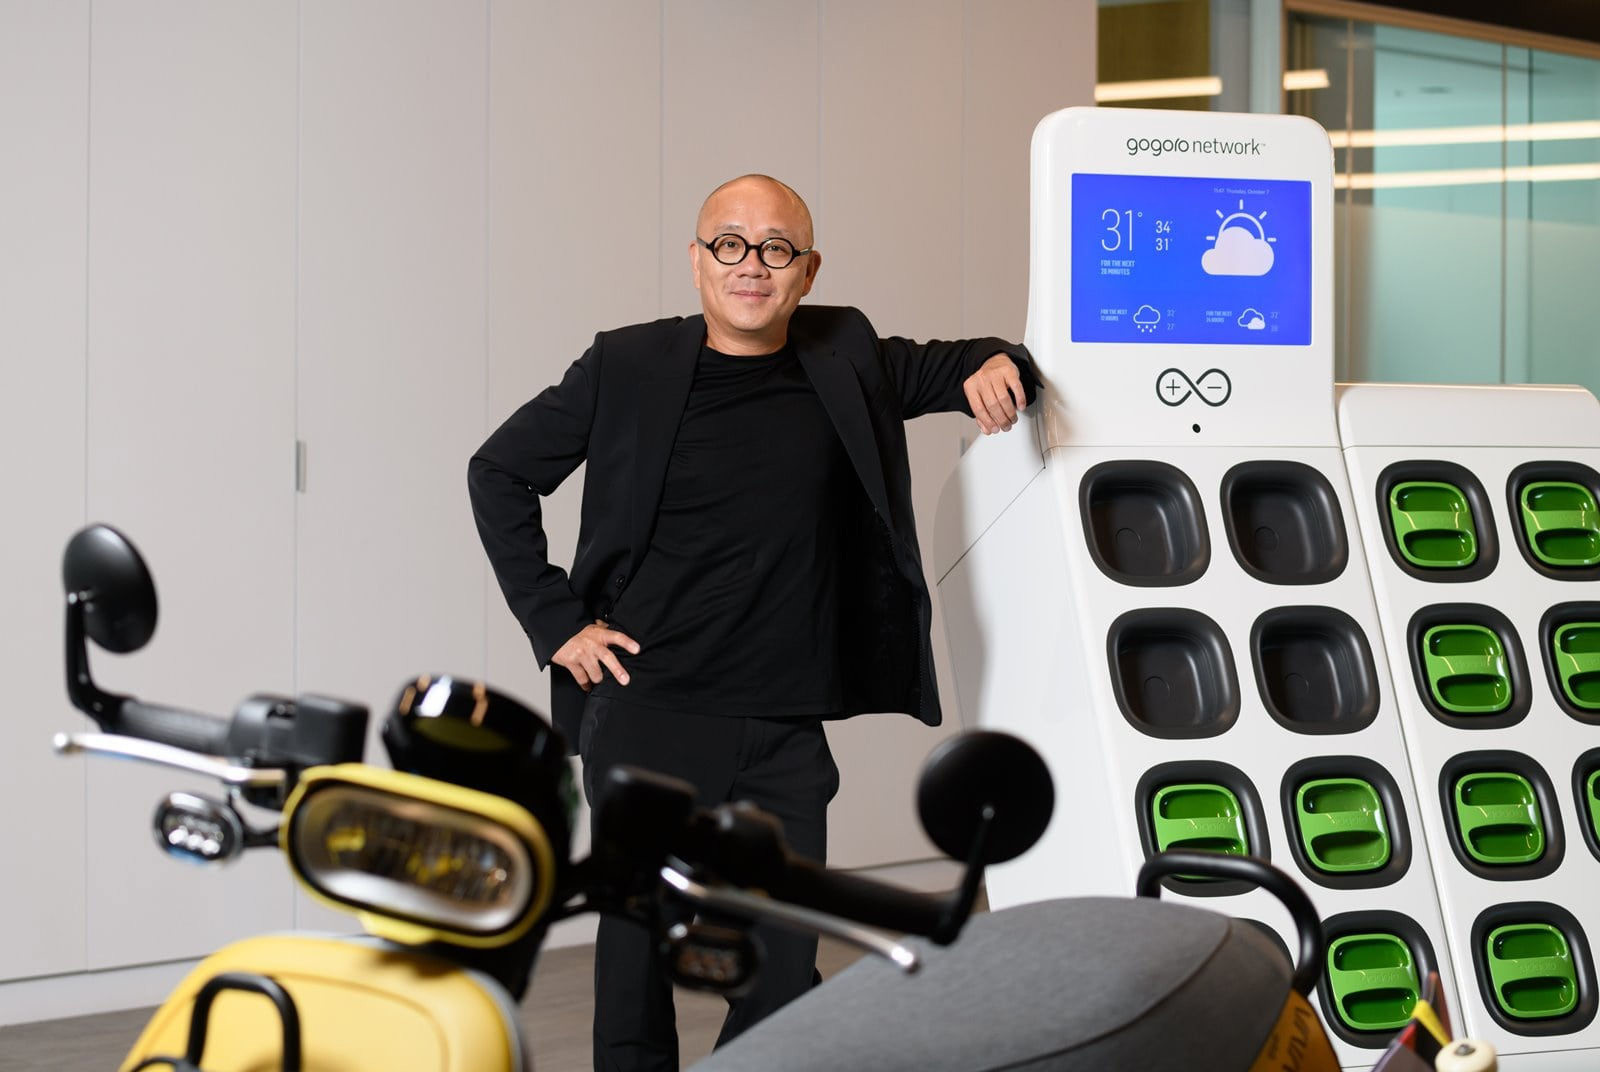 Gogoro CEO over SPAC deal: “We are ready to go big”